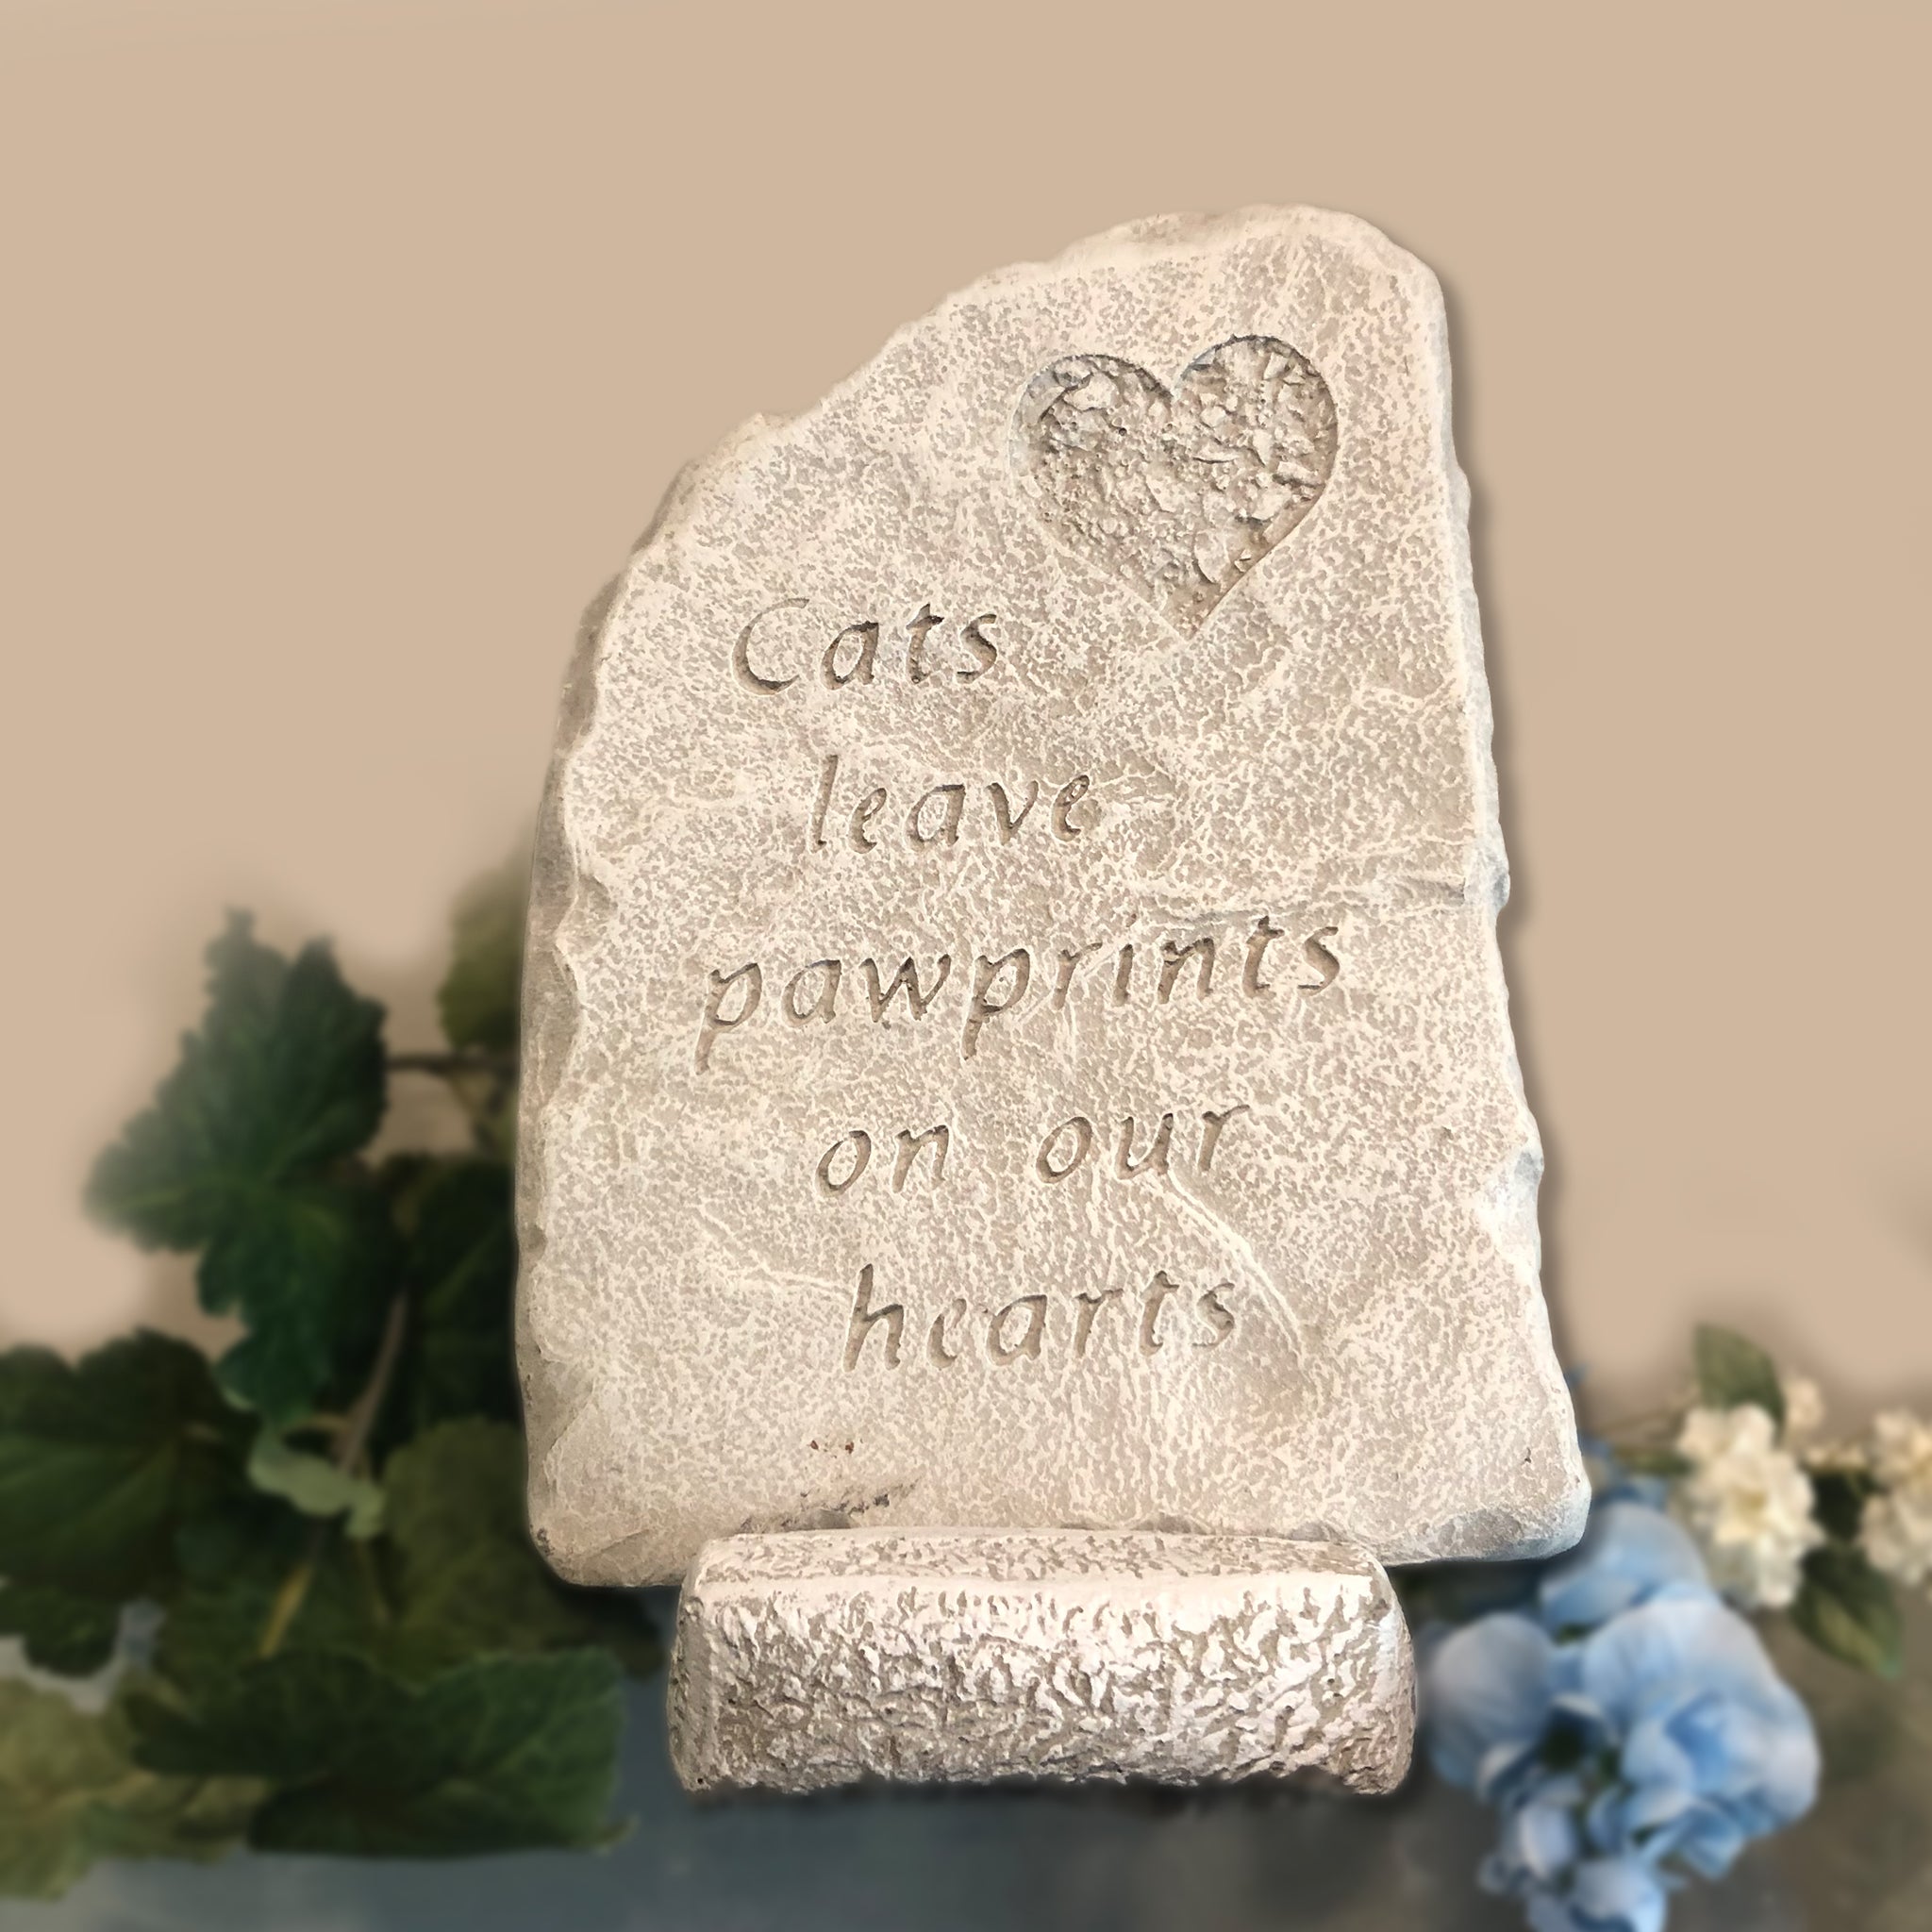 Cats Leave a Pawprint on Our Hearts Plaque